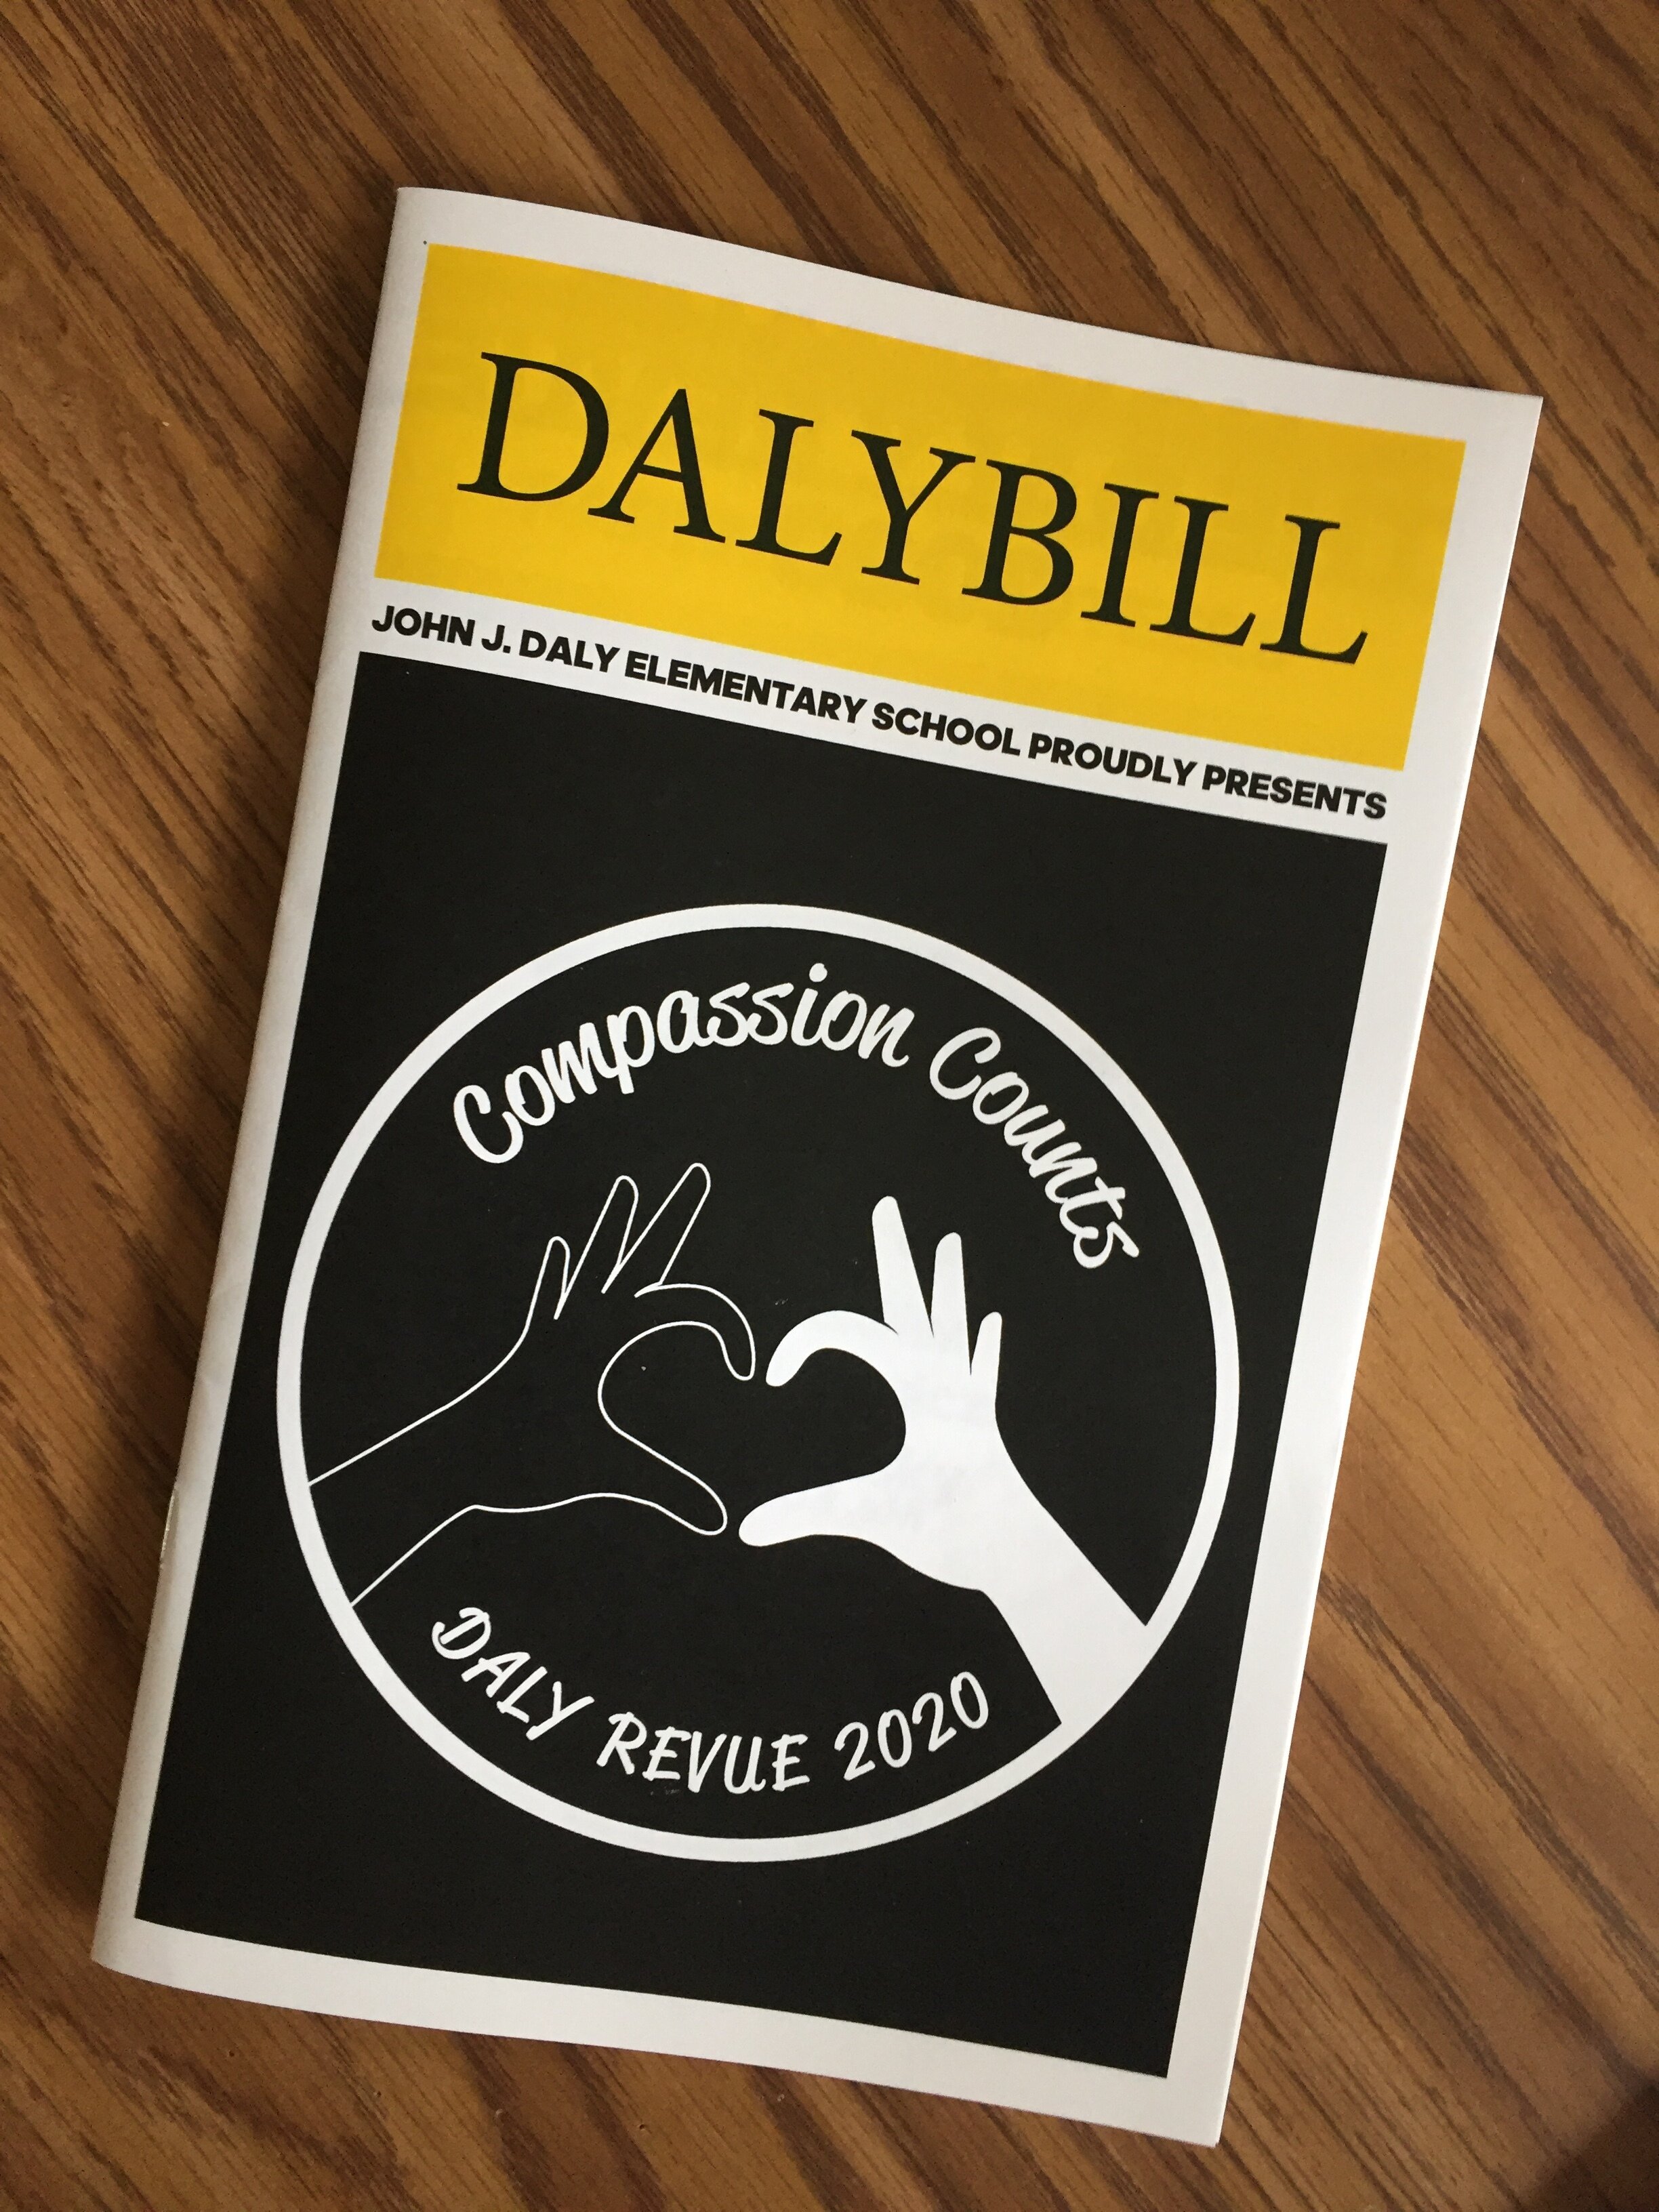 Playbill design for Daly Elementary School event.